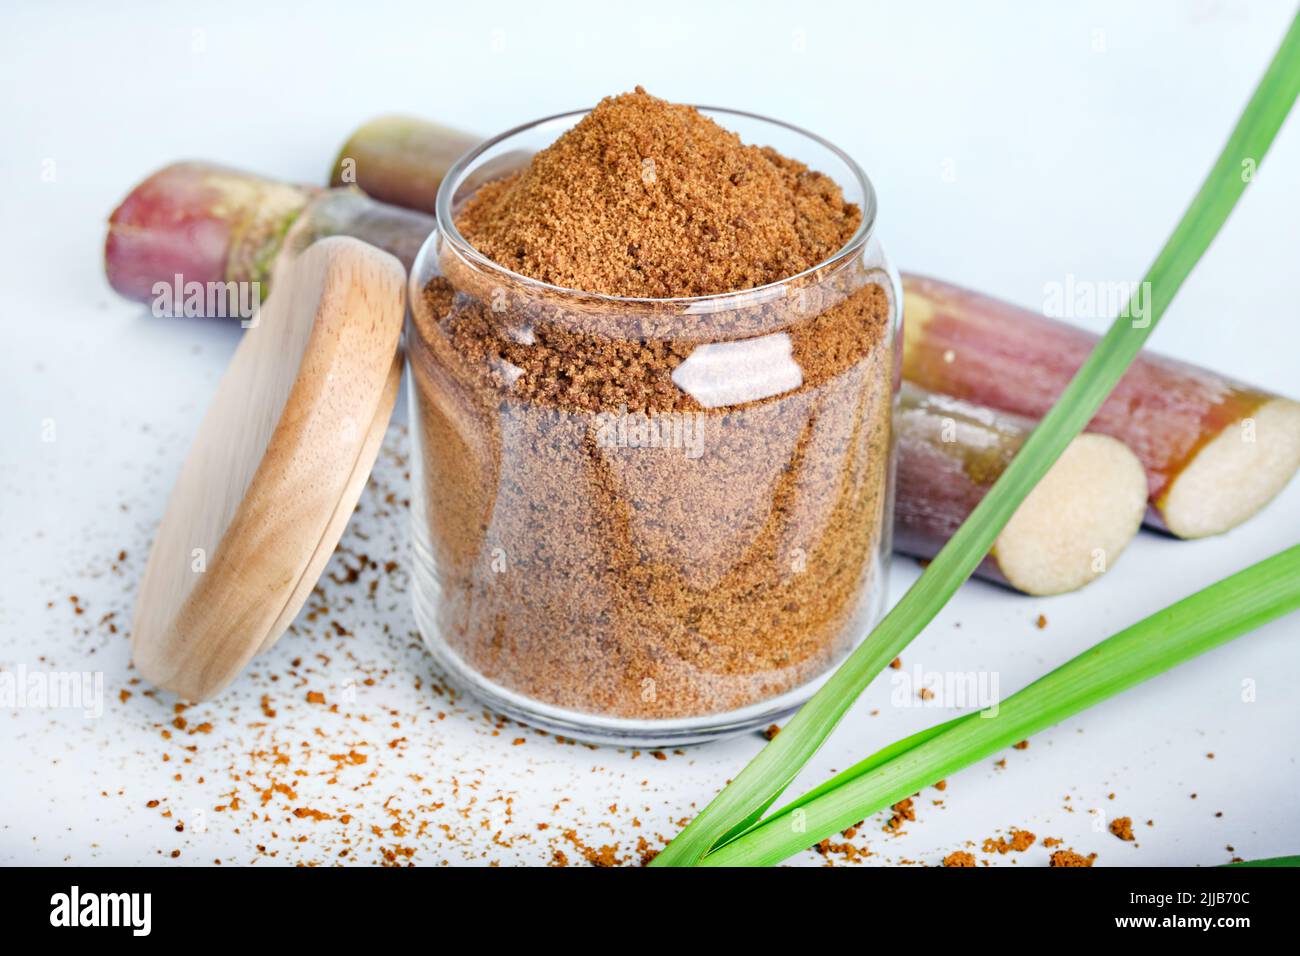 Organic Gur or Jaggery Powder, Jaggery is used as an ingredient in sweet and savoury dishes in the cuisines of India. Stock Photo